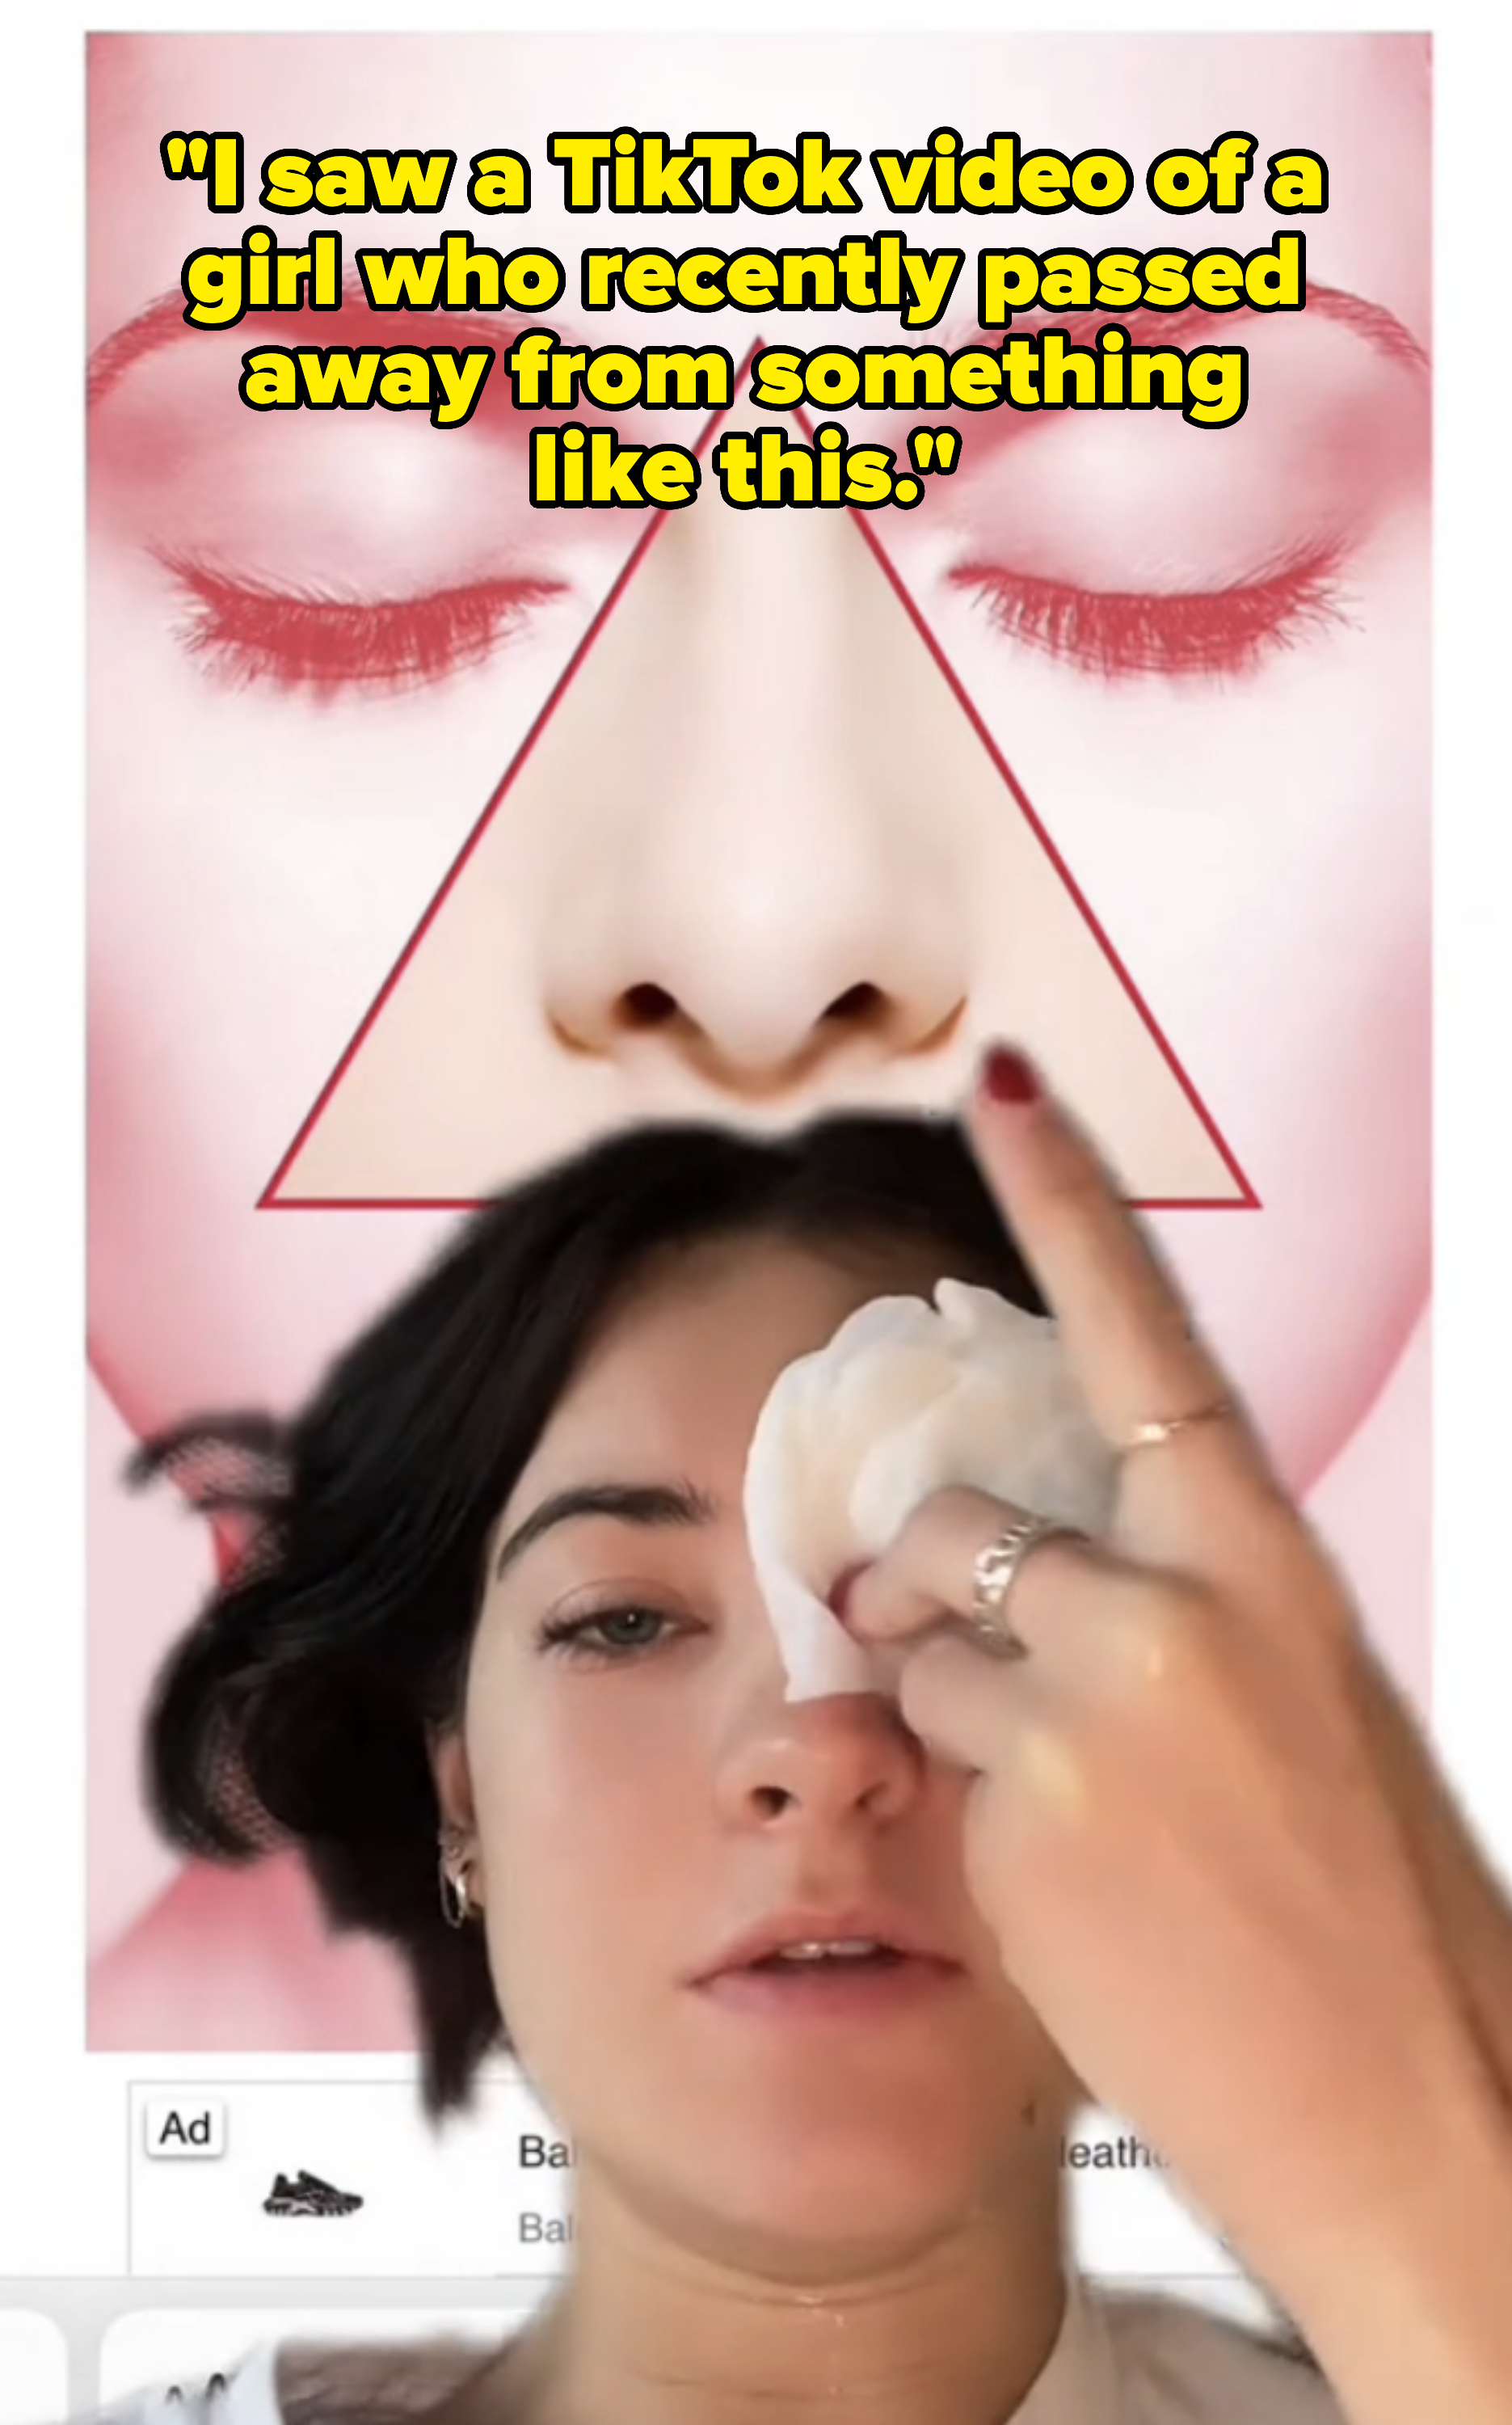 Brooke Hyland covering her eye while pointing to a diagram with caption &quot;I saw a TikTok video of a girl who recently passed away from something like this.&quot;